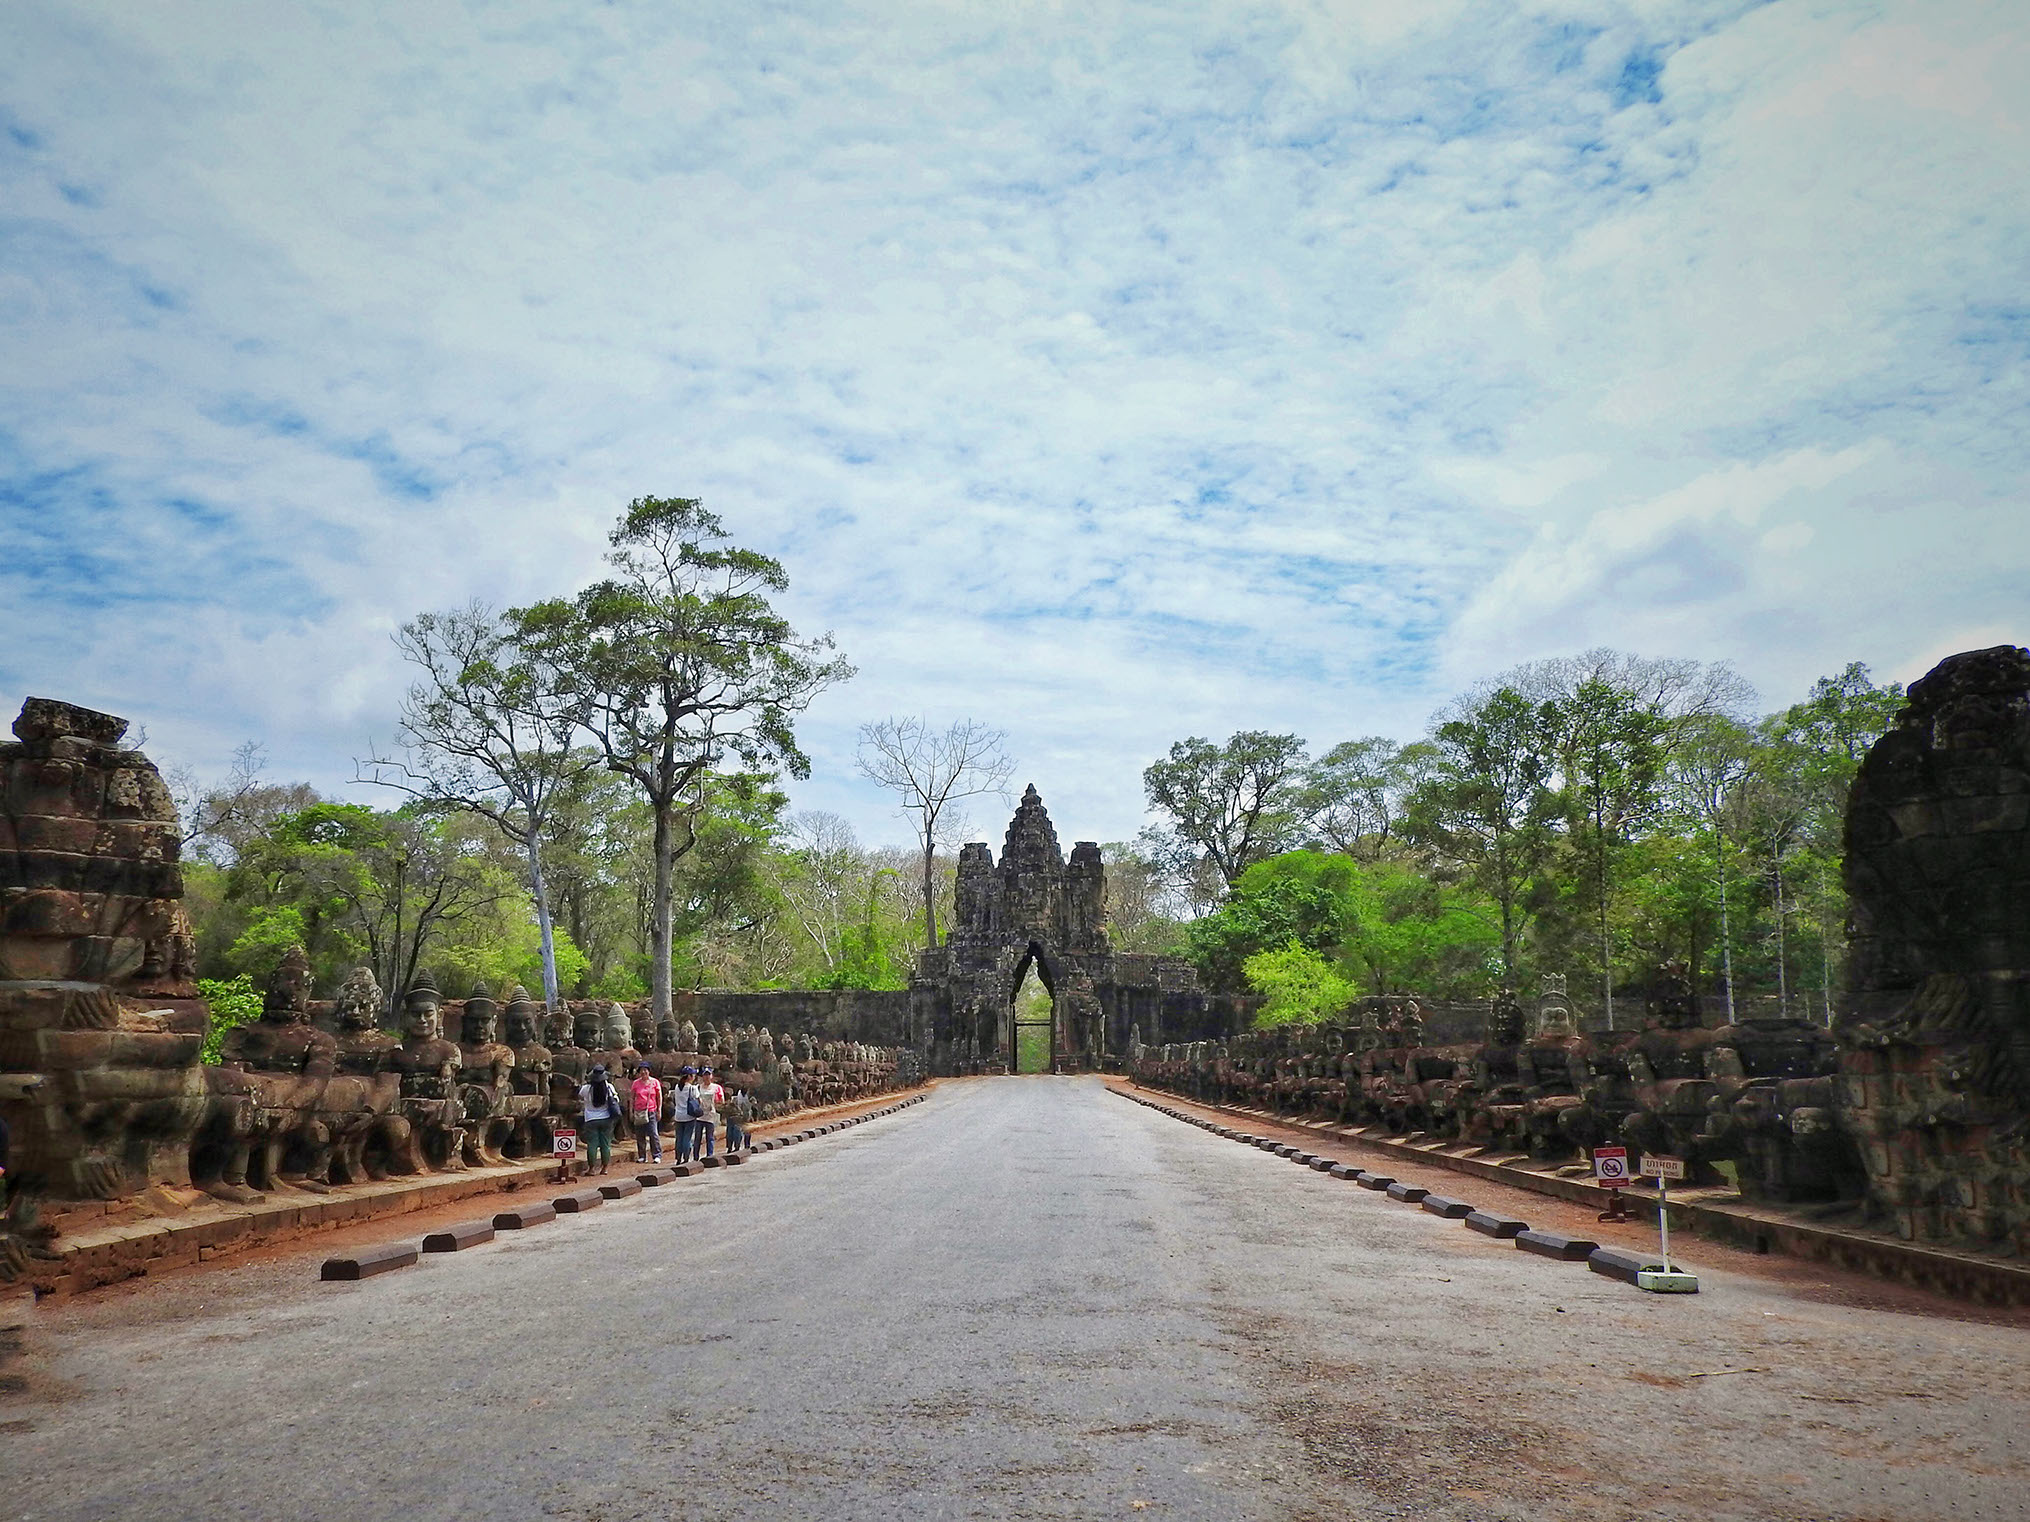 The South Gate of Angkor Thom in Siem Reap